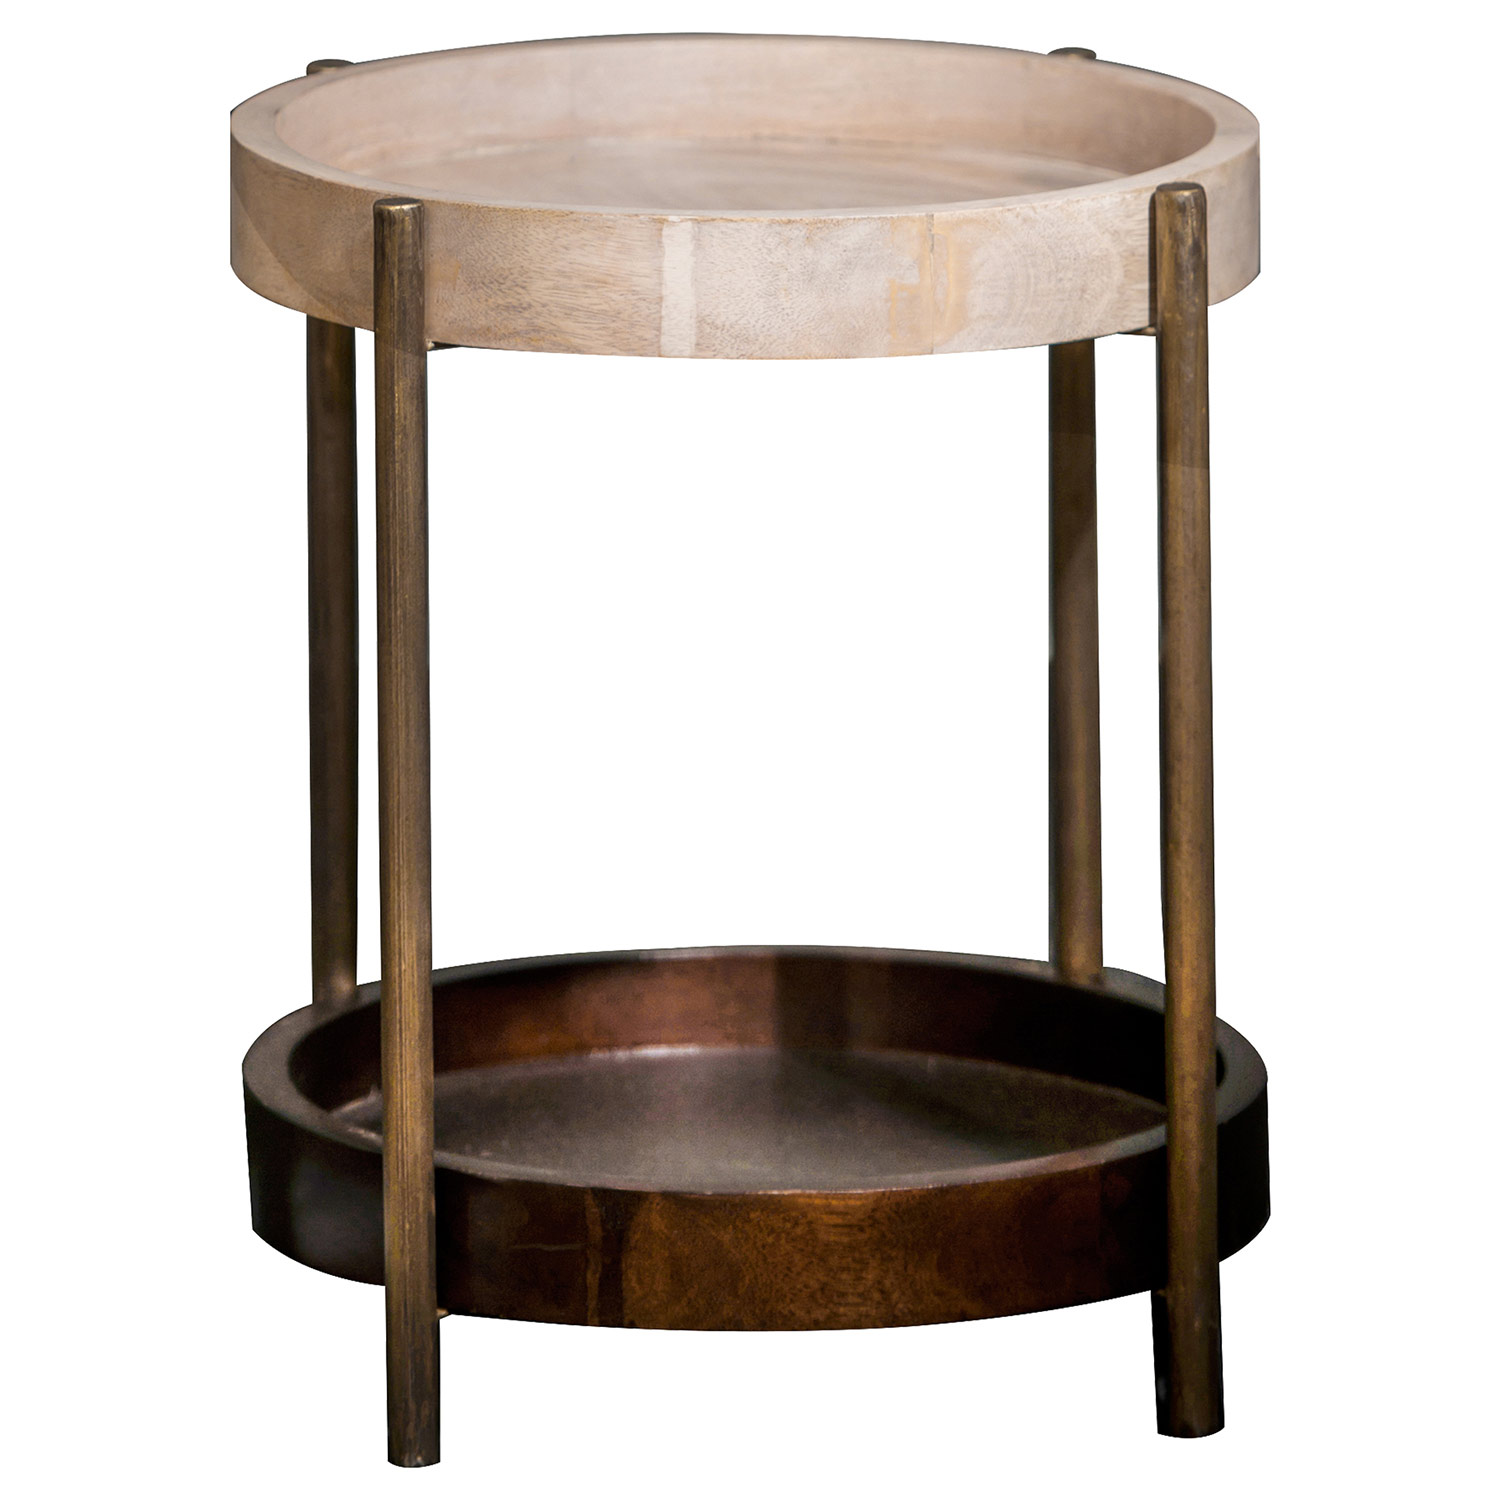 Ren-Wil Winona Accent Table - Gold Plate/White Wash